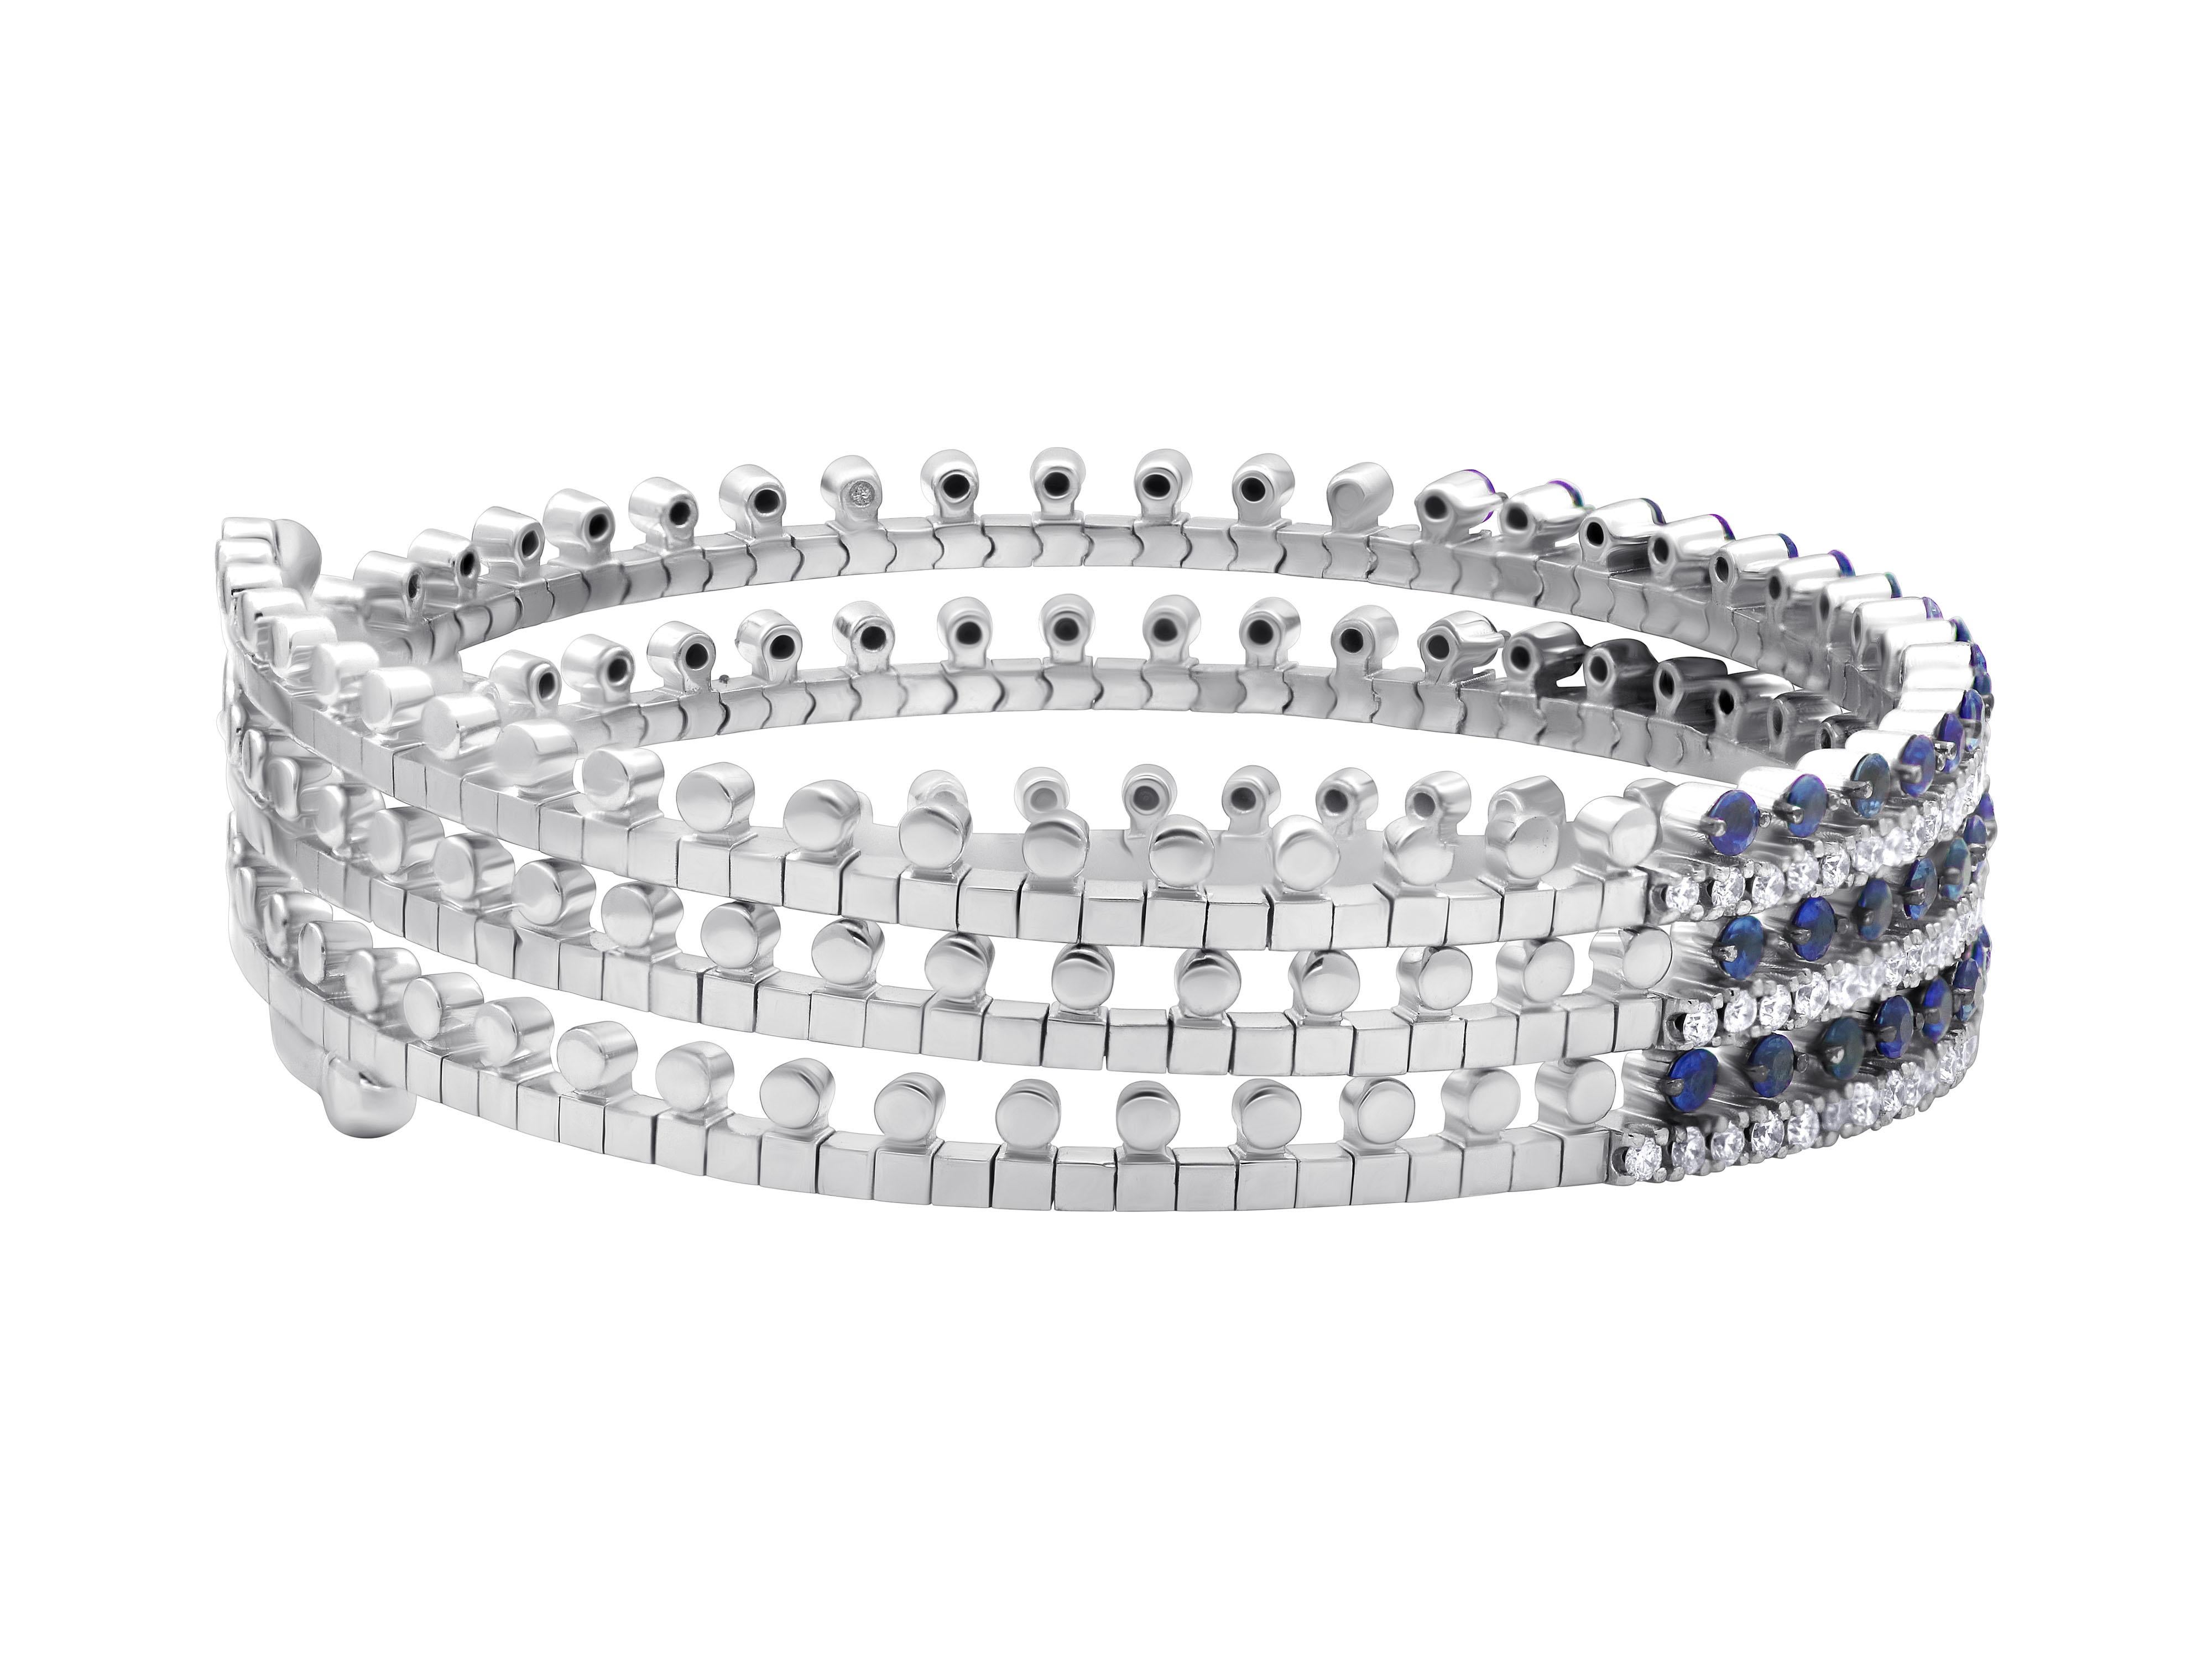 Flexible spiral bracelet in 18k white gold with 1.90 carats blue sapphires and 1.26 carats brilliant diamonds.

